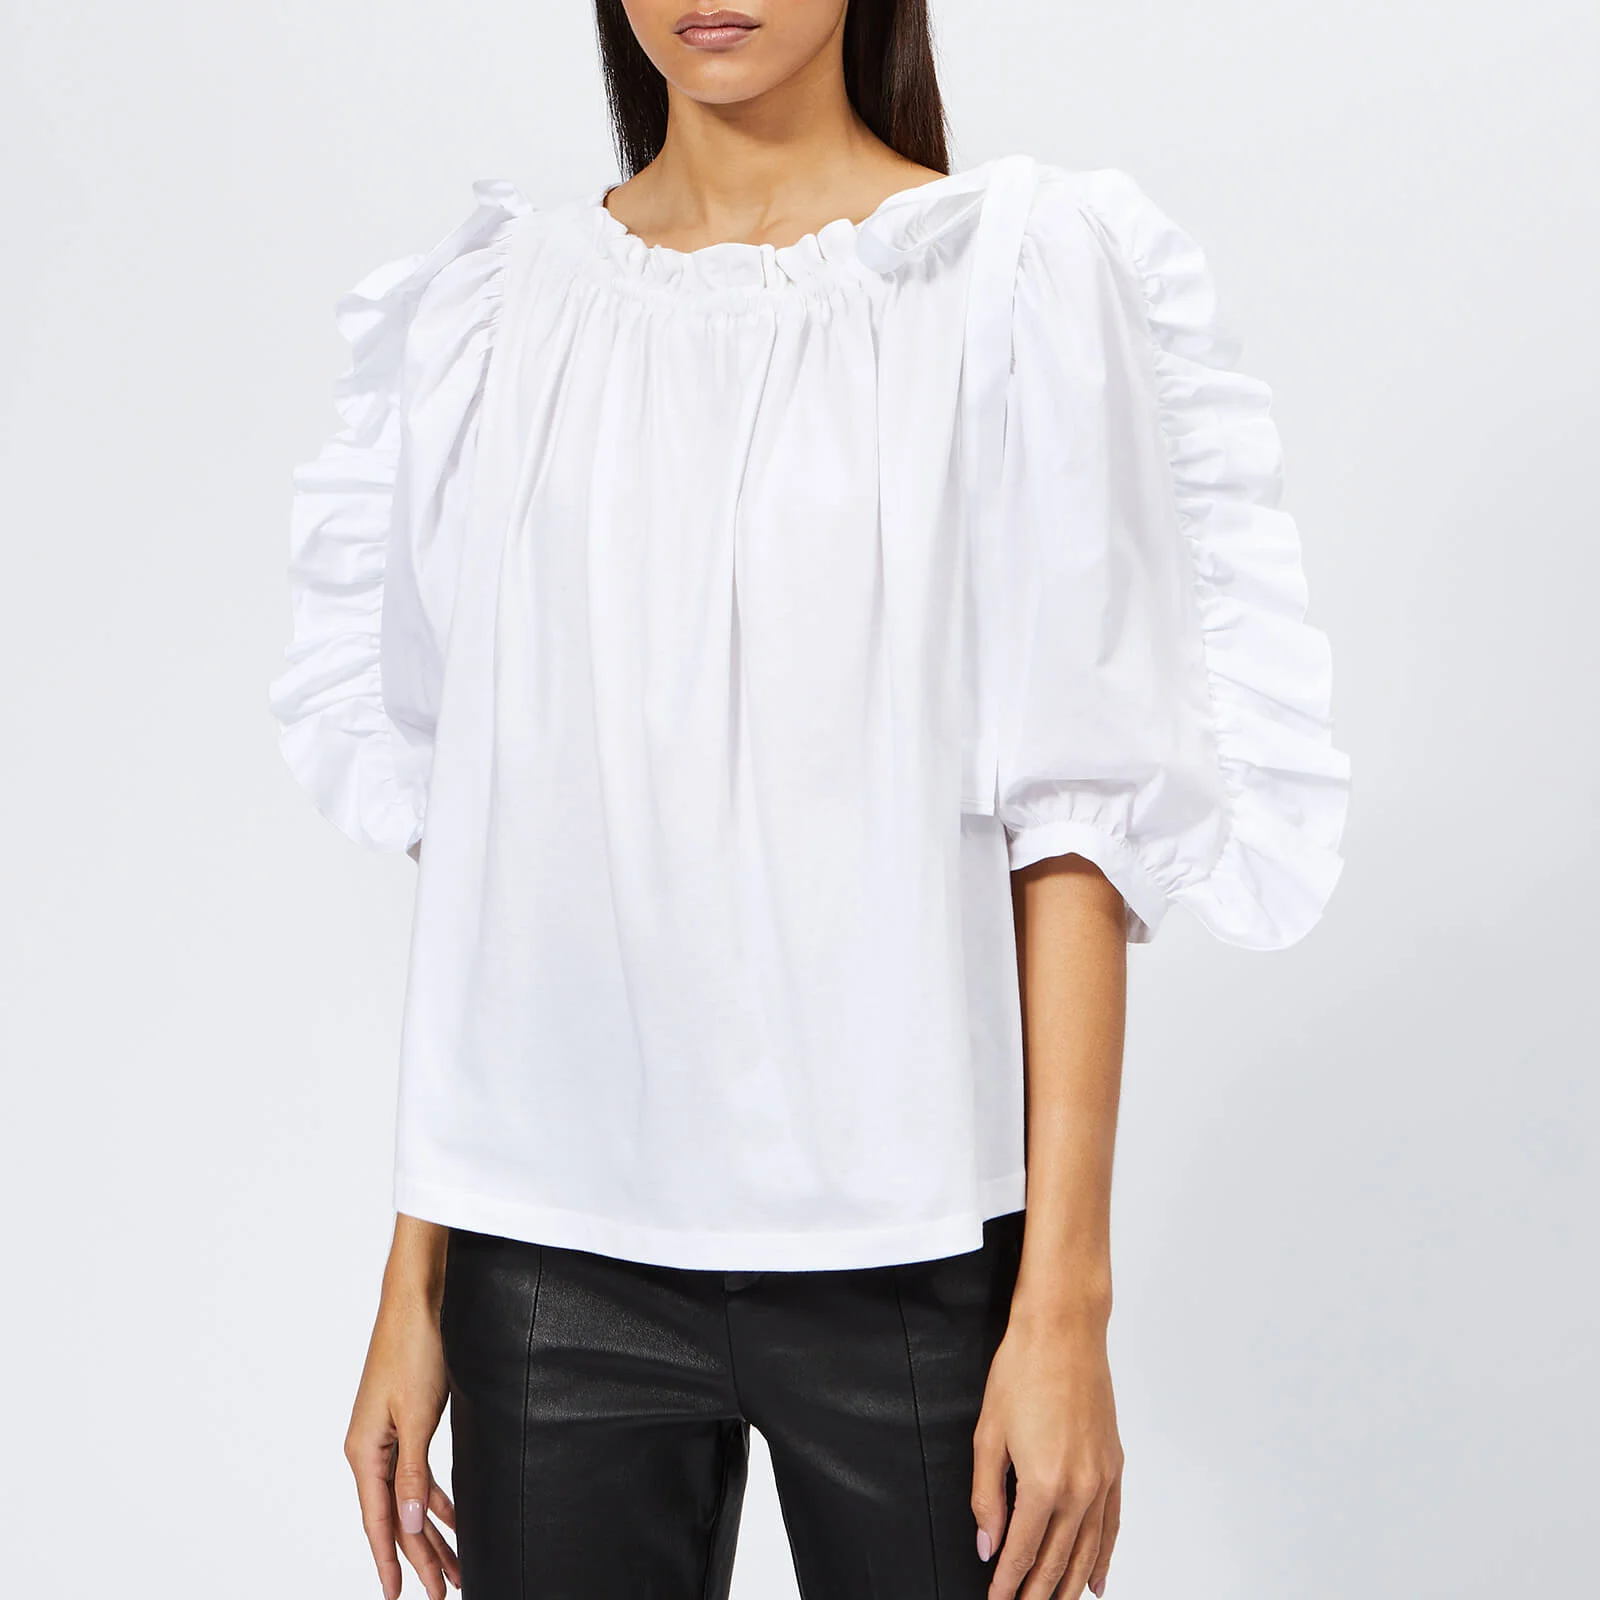 See By Chloé Women's Frill Sleeve Top - White Powder Image 1